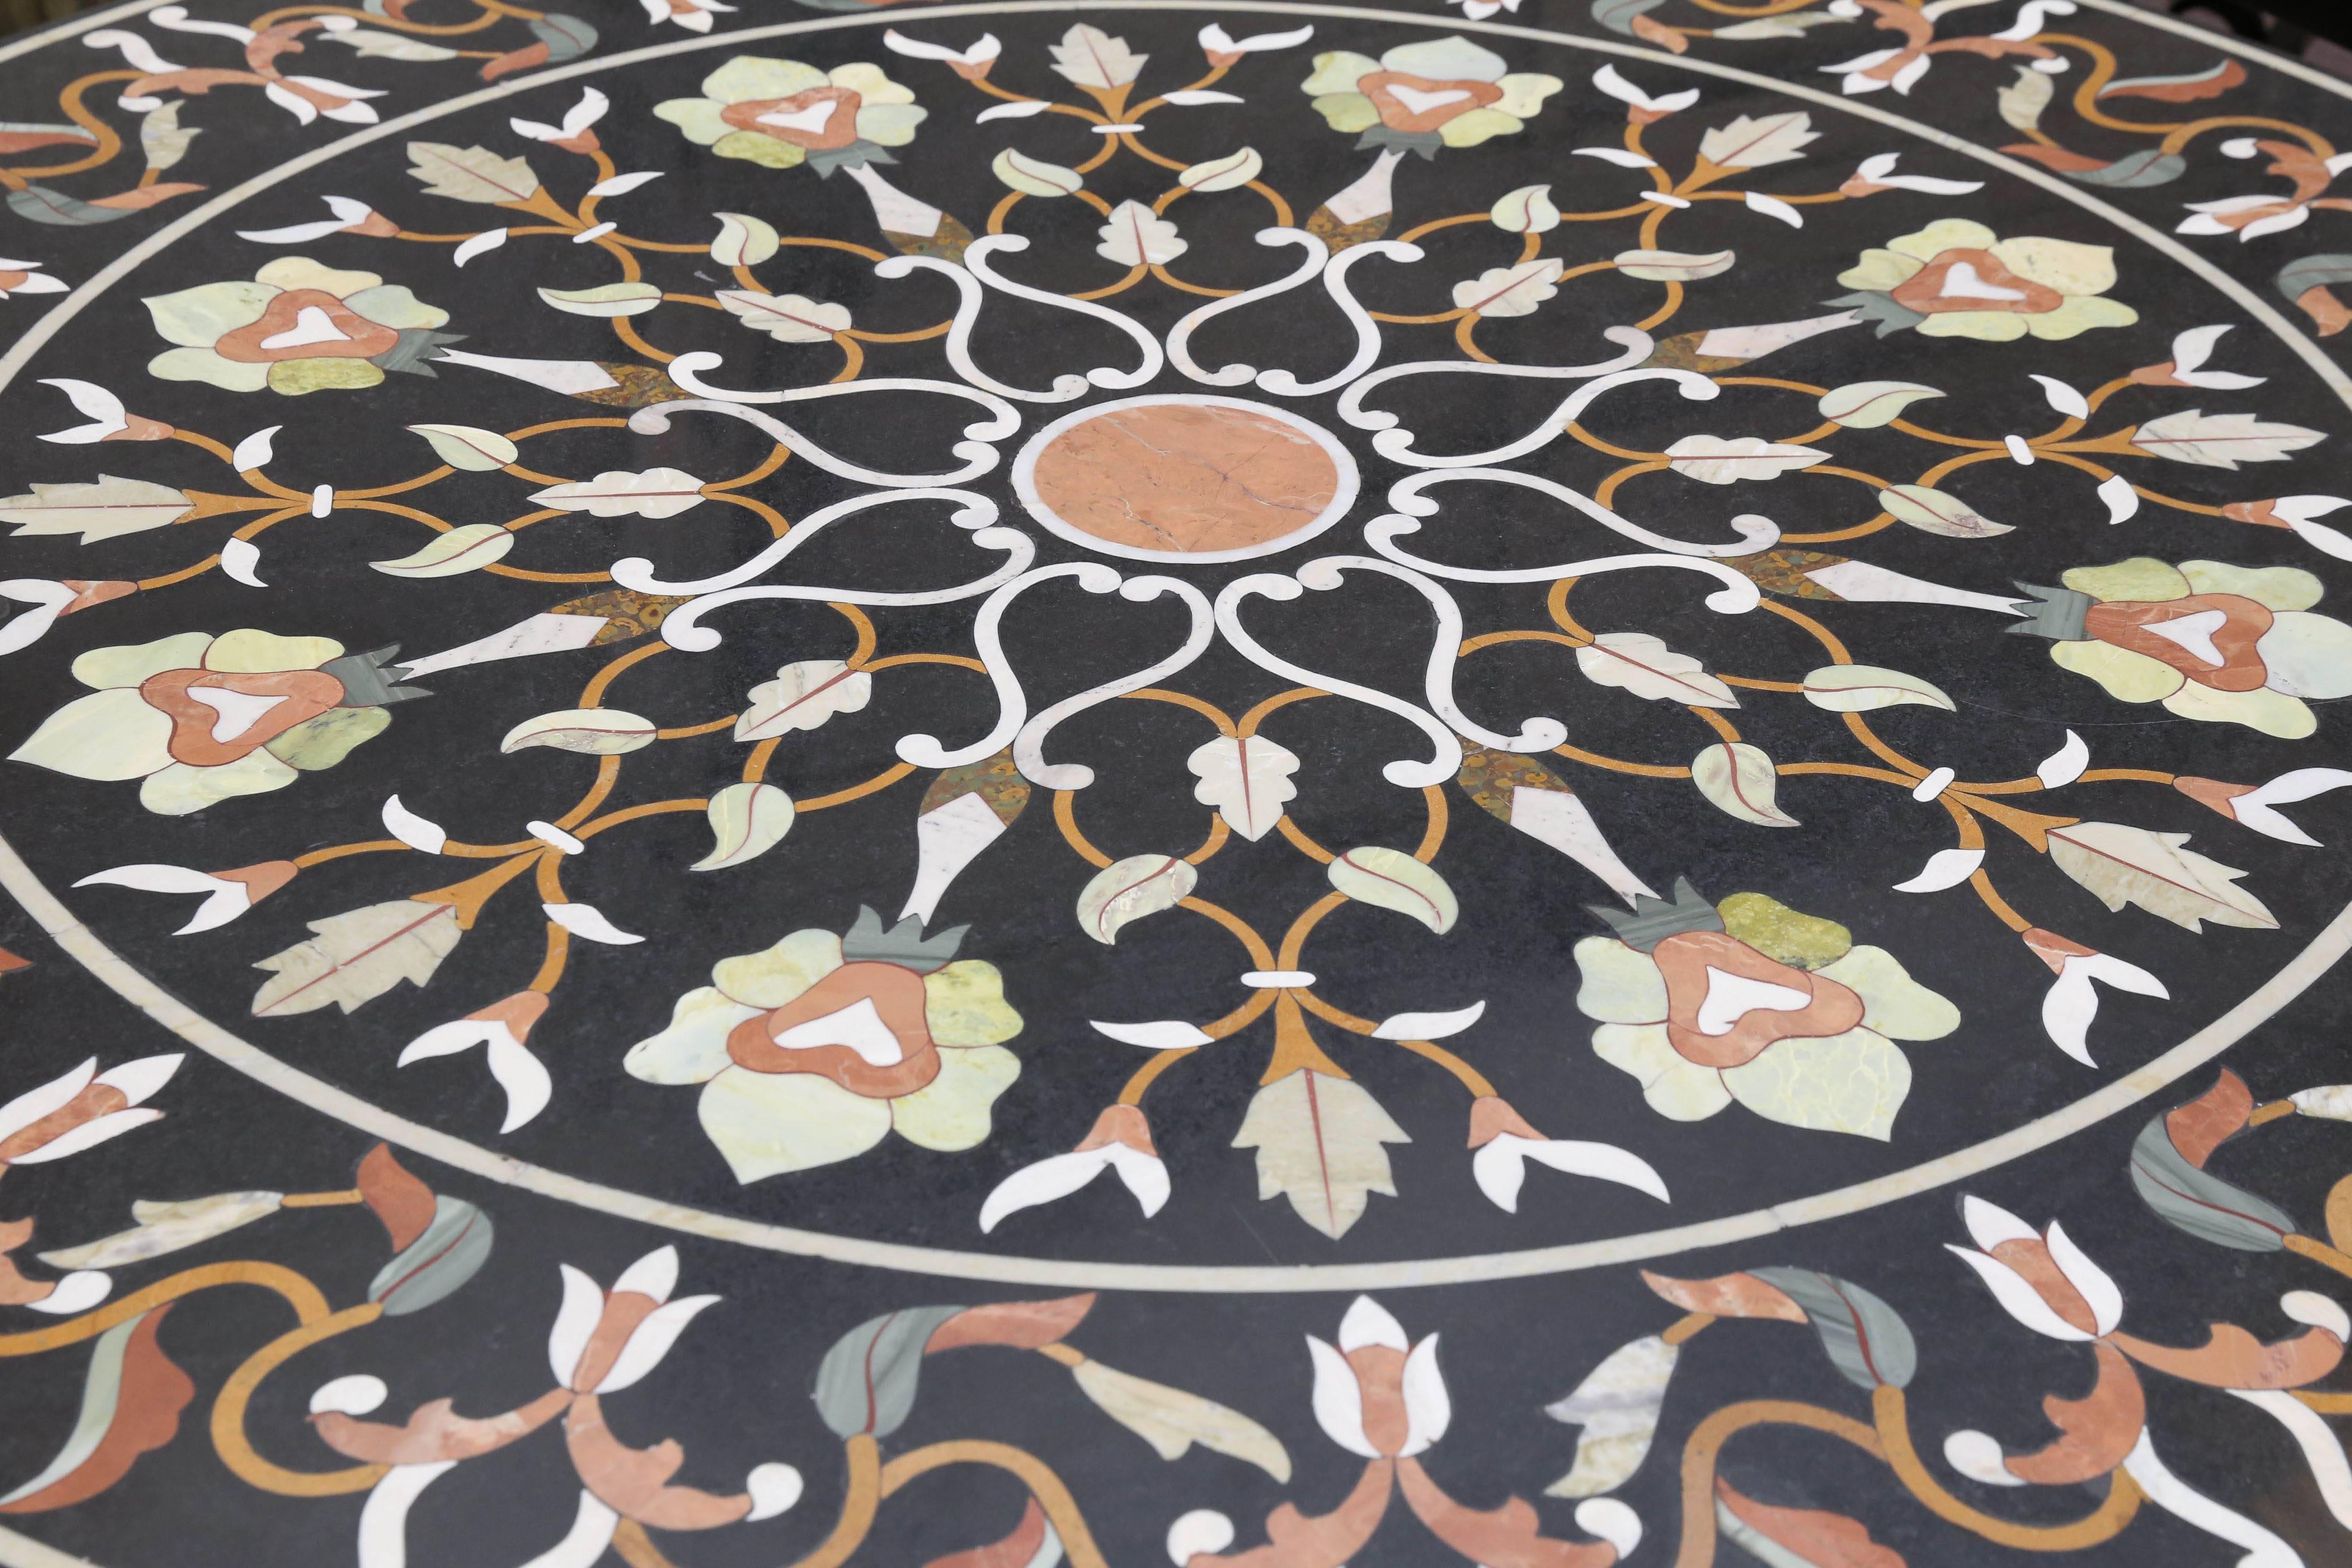 Intricately hand inlaid black marble round center table from central India. The pattern for the inlay design comes from a Persian garden motif. The table is superbly inlaid with rare marbles and semi-precious stones from Afghanistan. It is supported